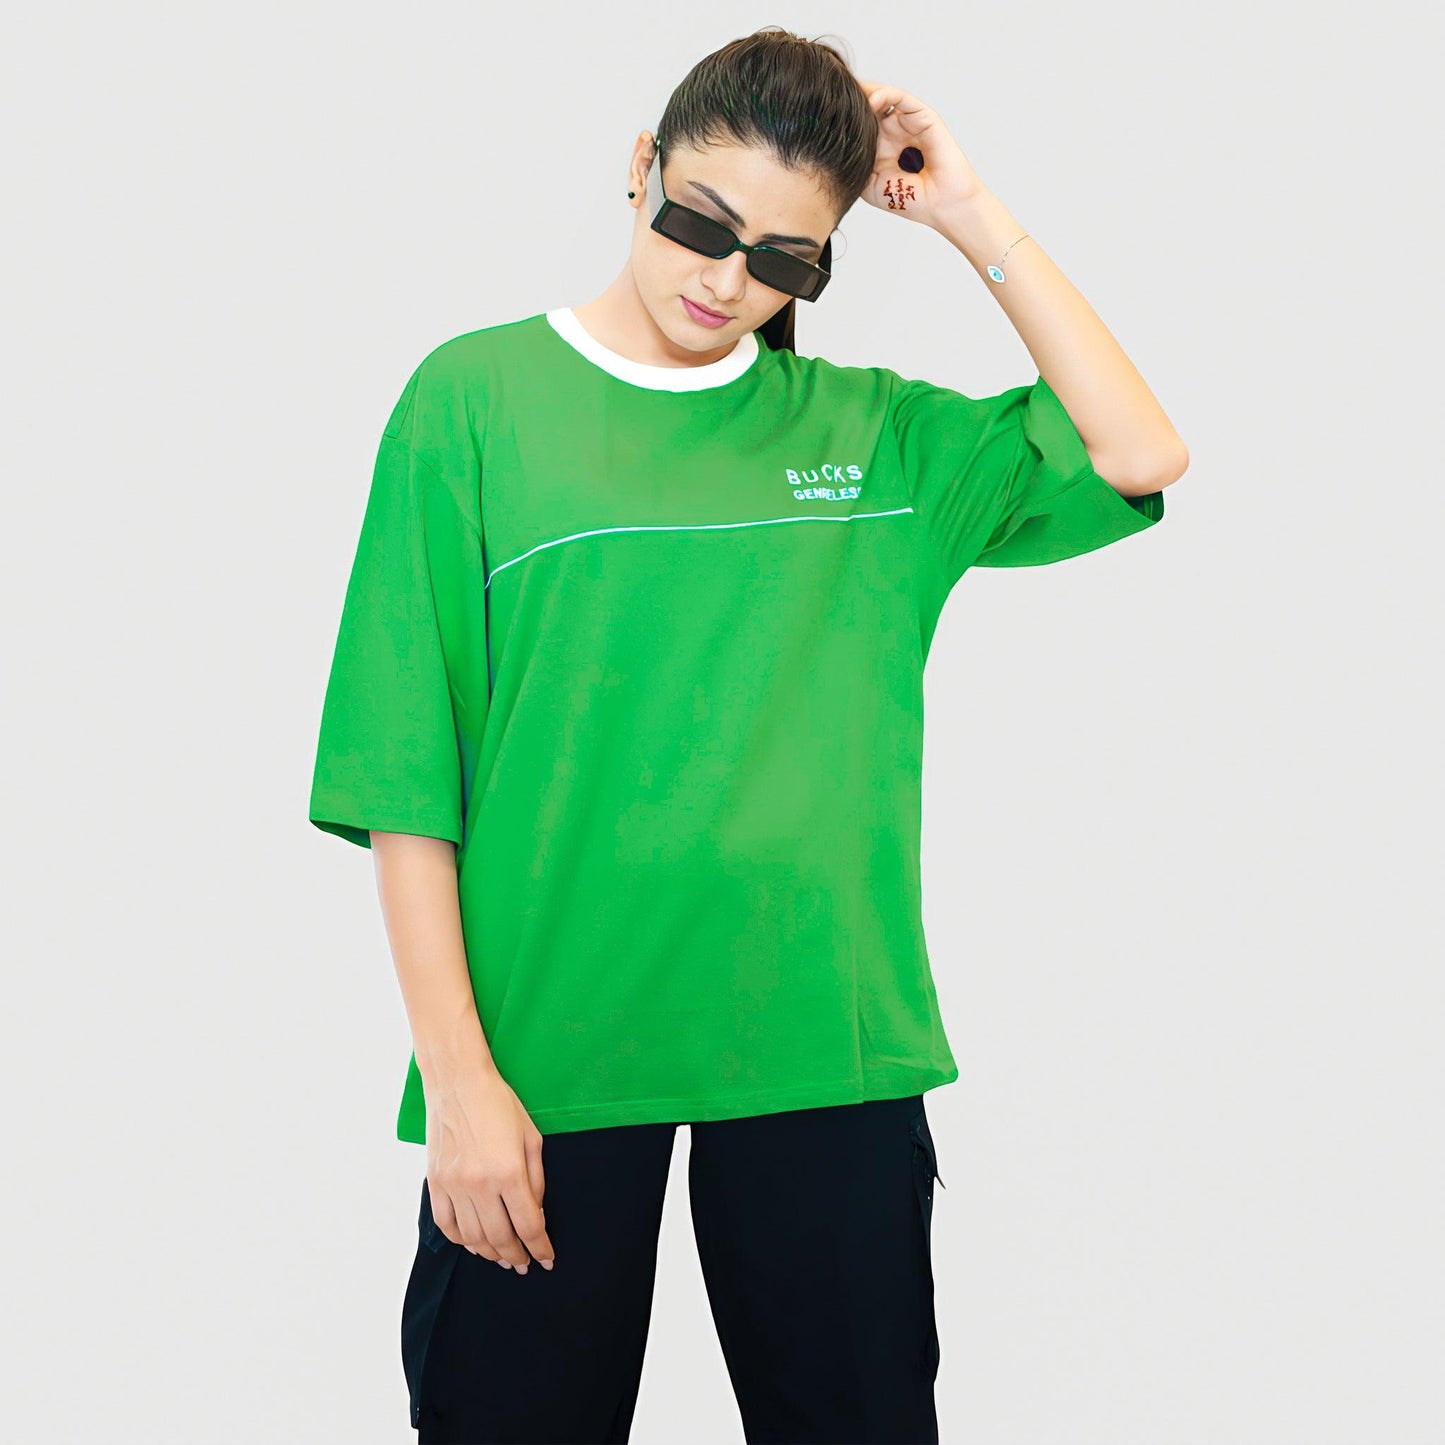 LOOPSTER'S Unisex Green Relaxed Fit T-shirt - Loopster